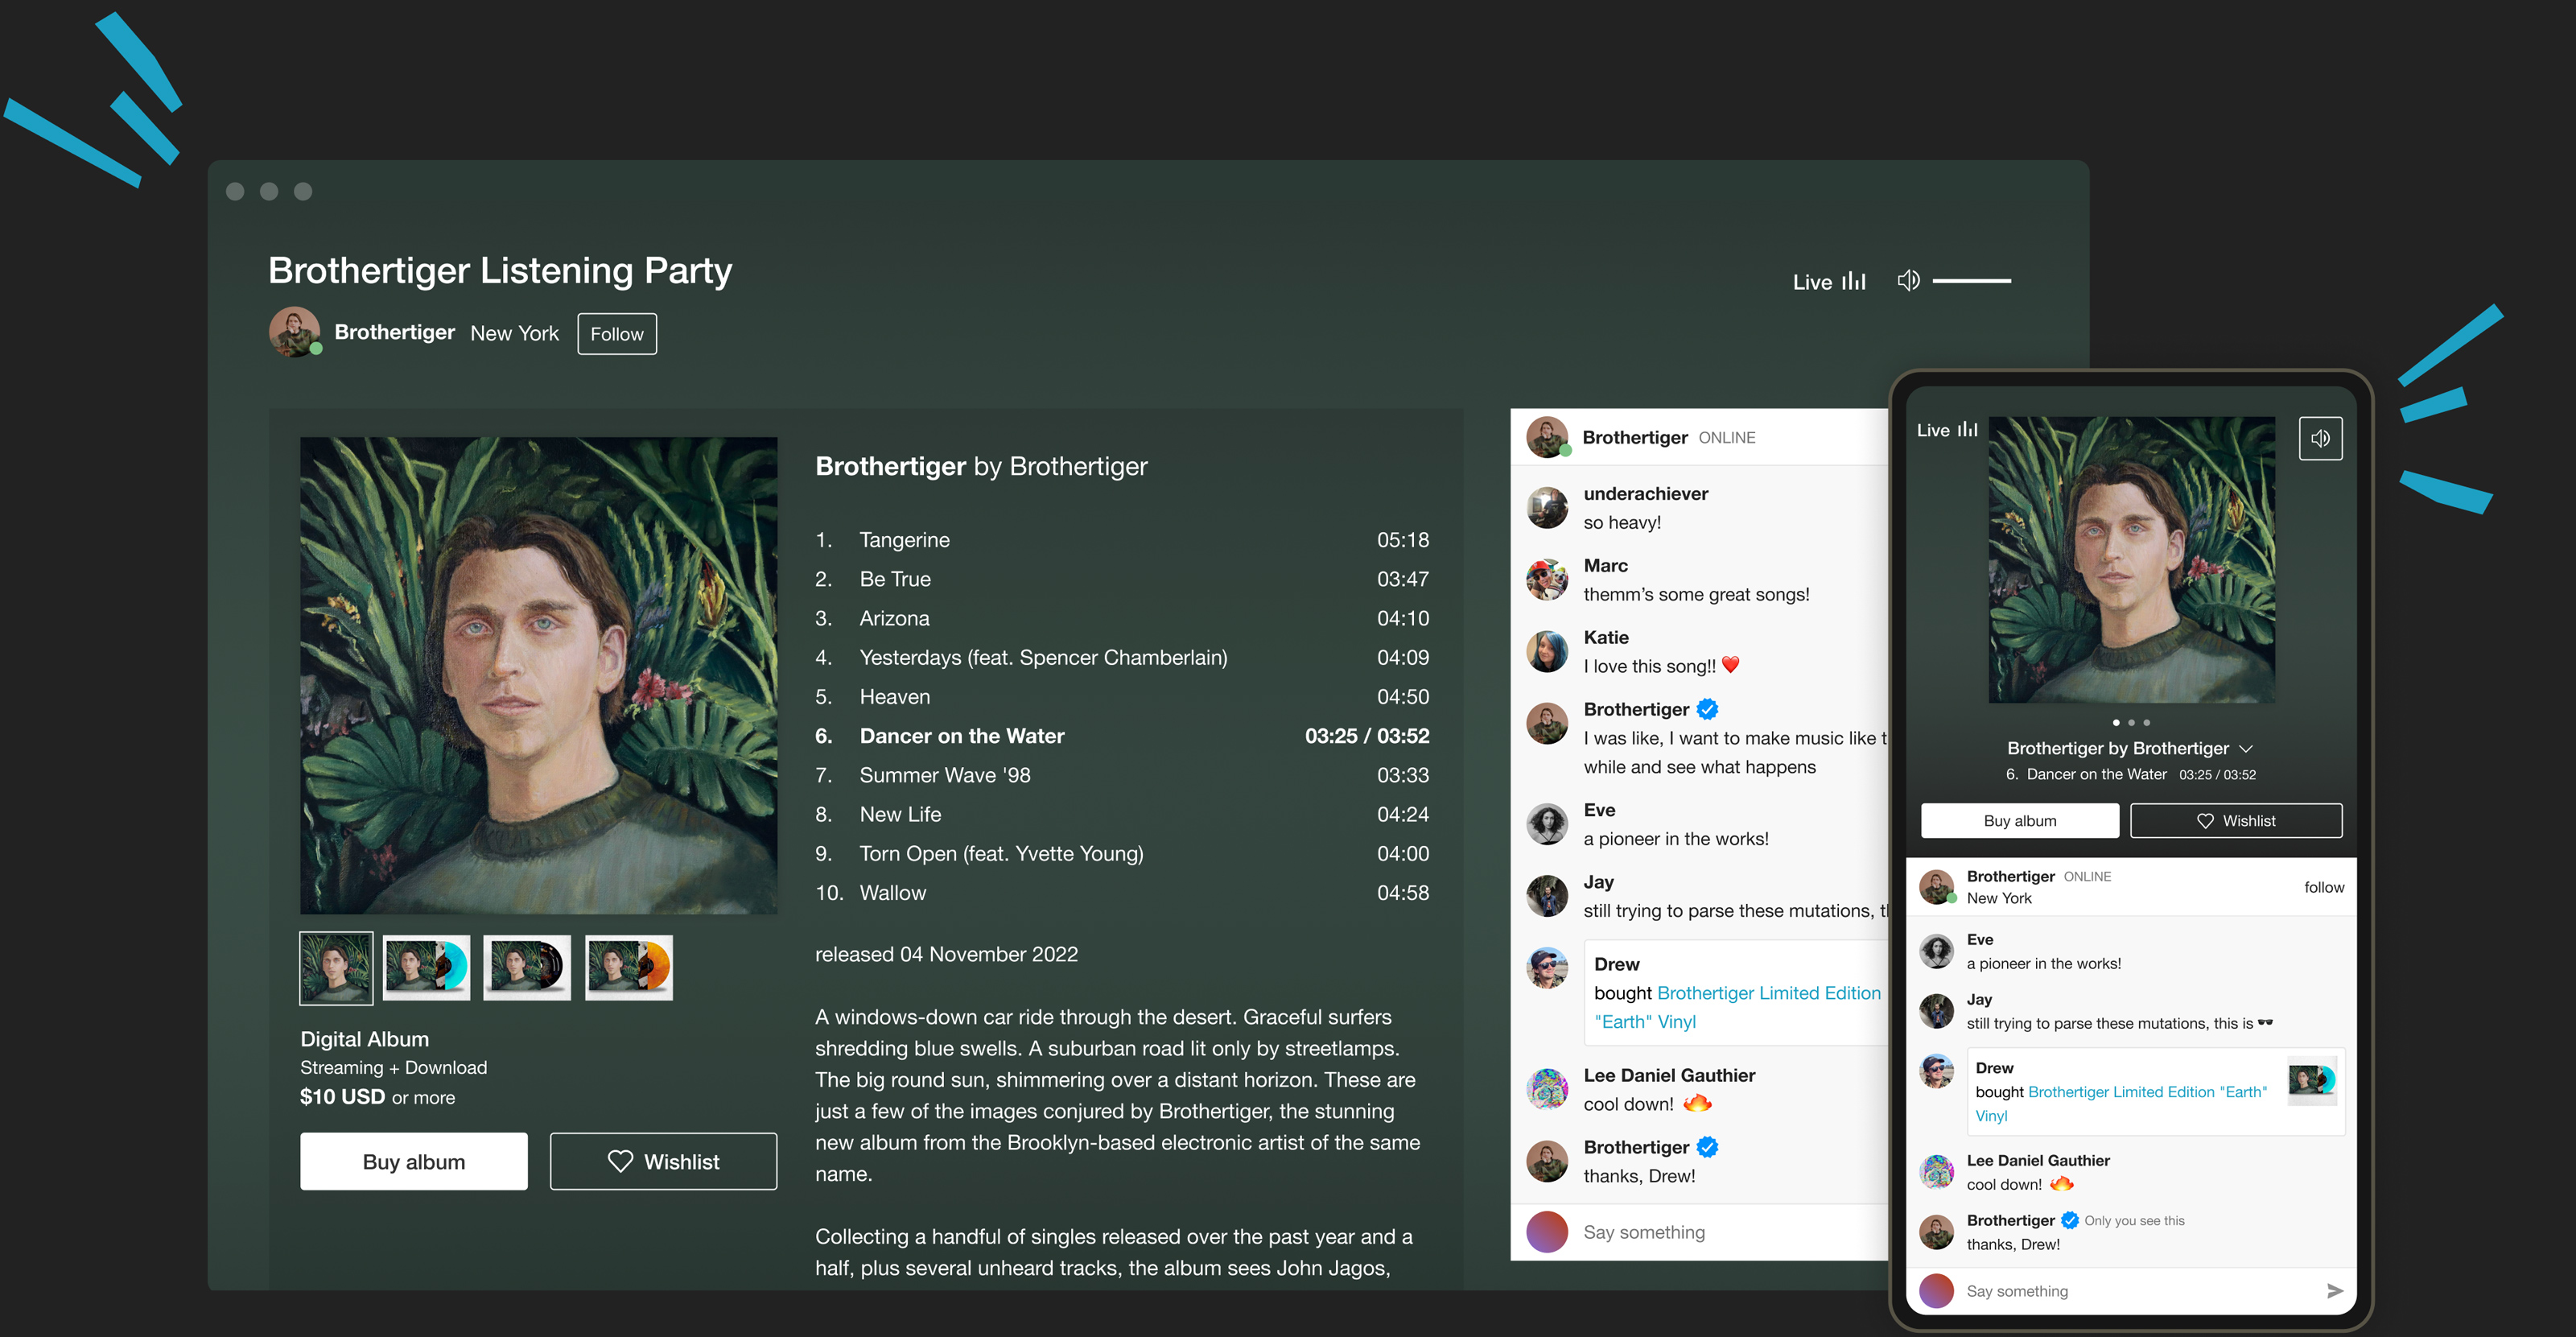 Desktop and mobile screens showing the artist Brothertiger hosting a listening party.